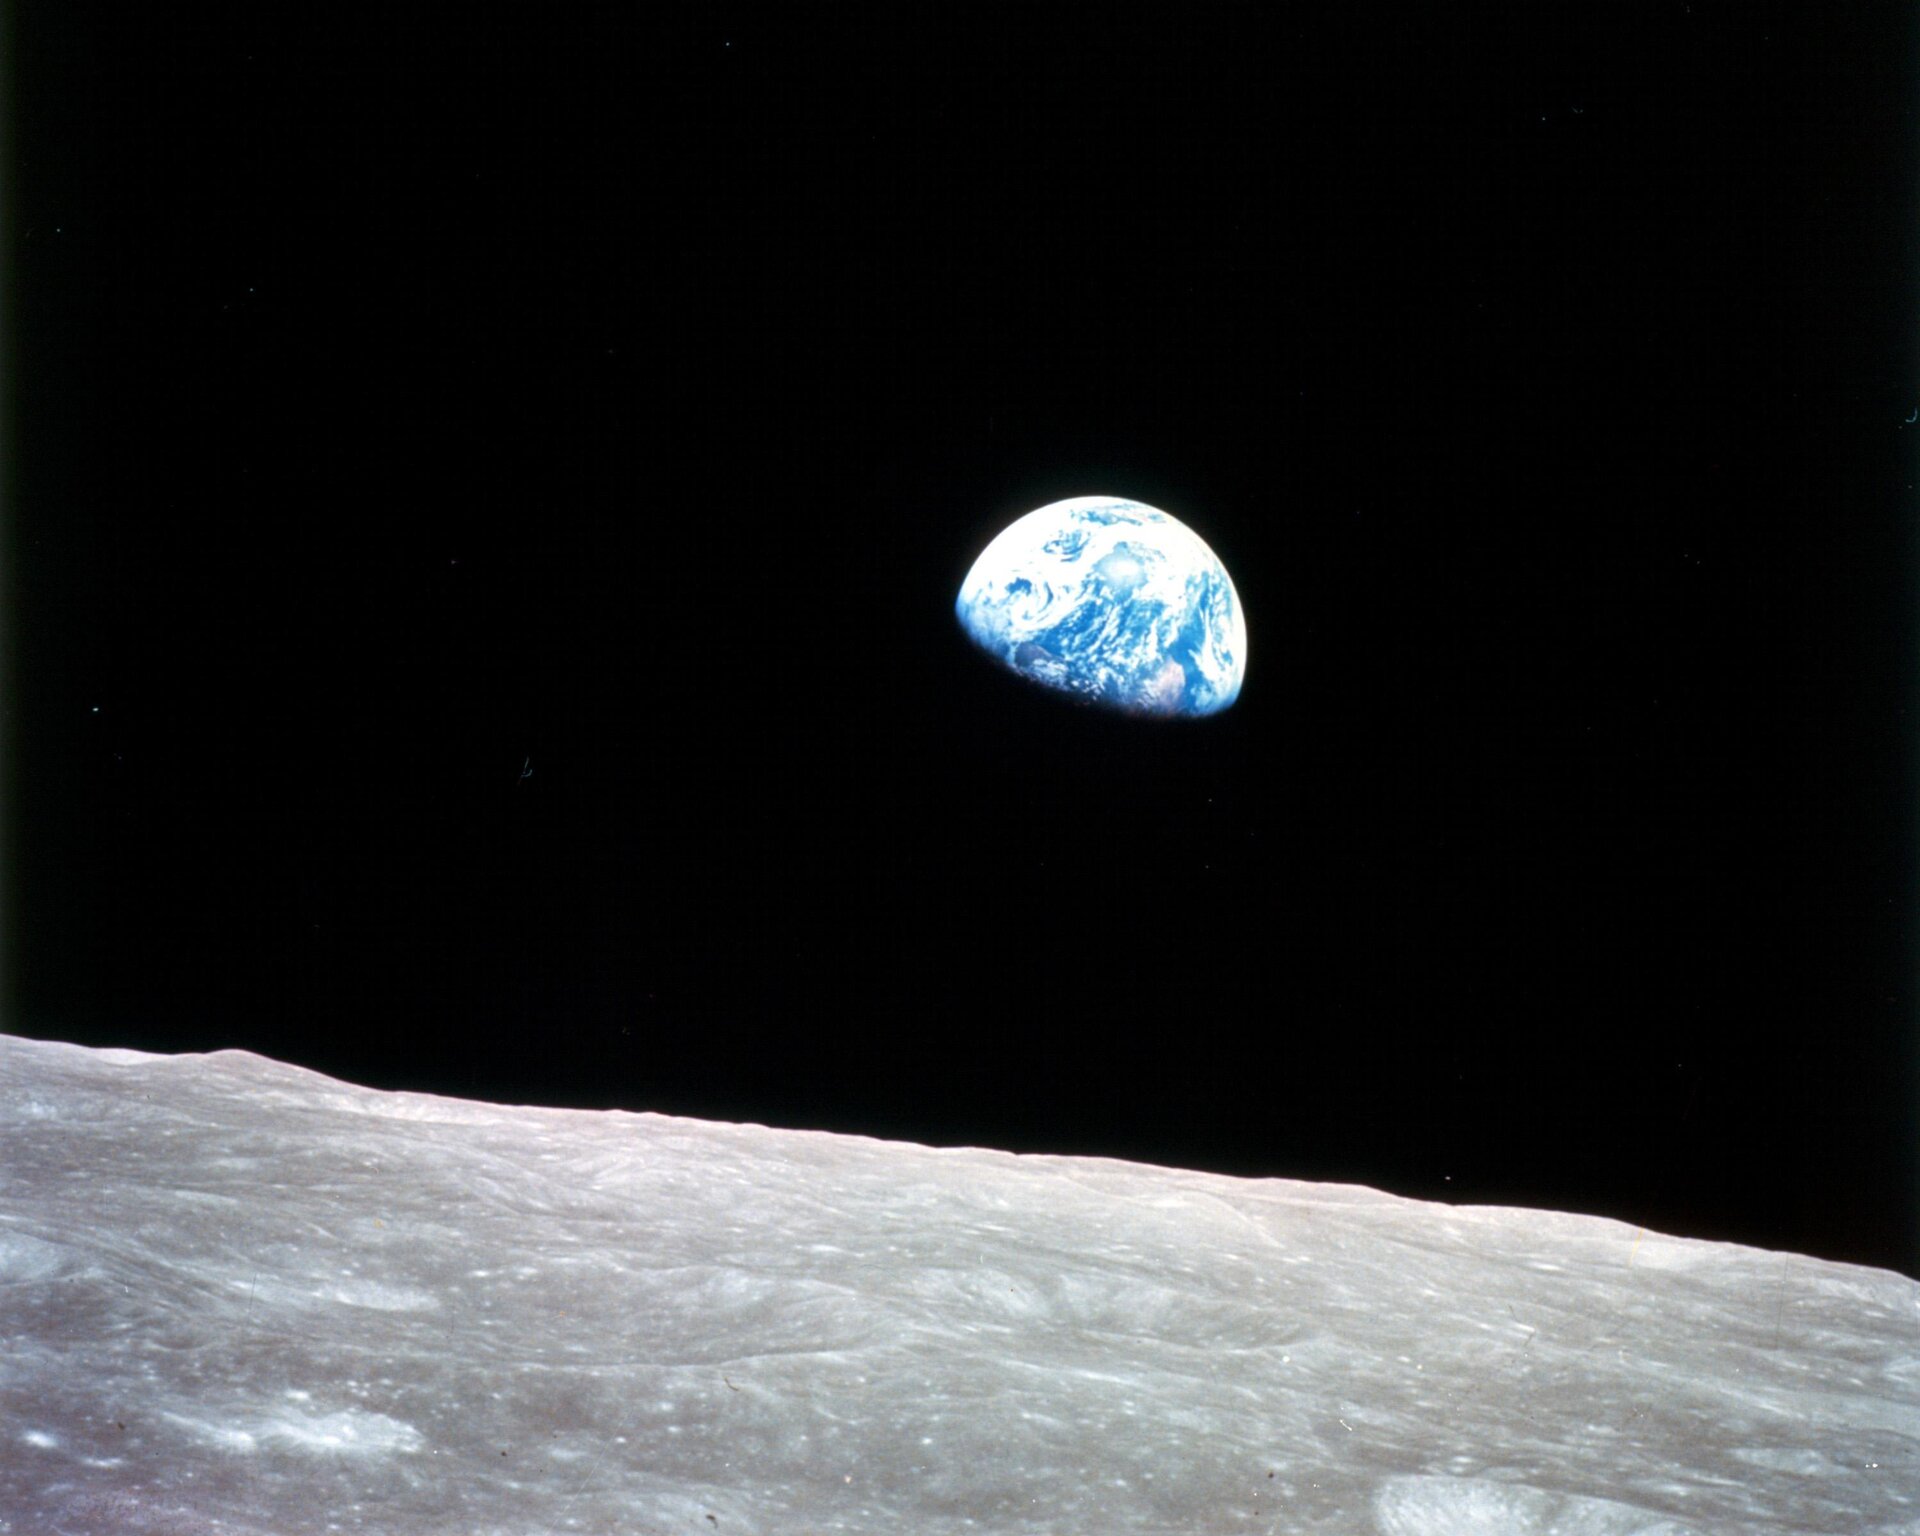 Iconic image of Earth rising above lunar surface